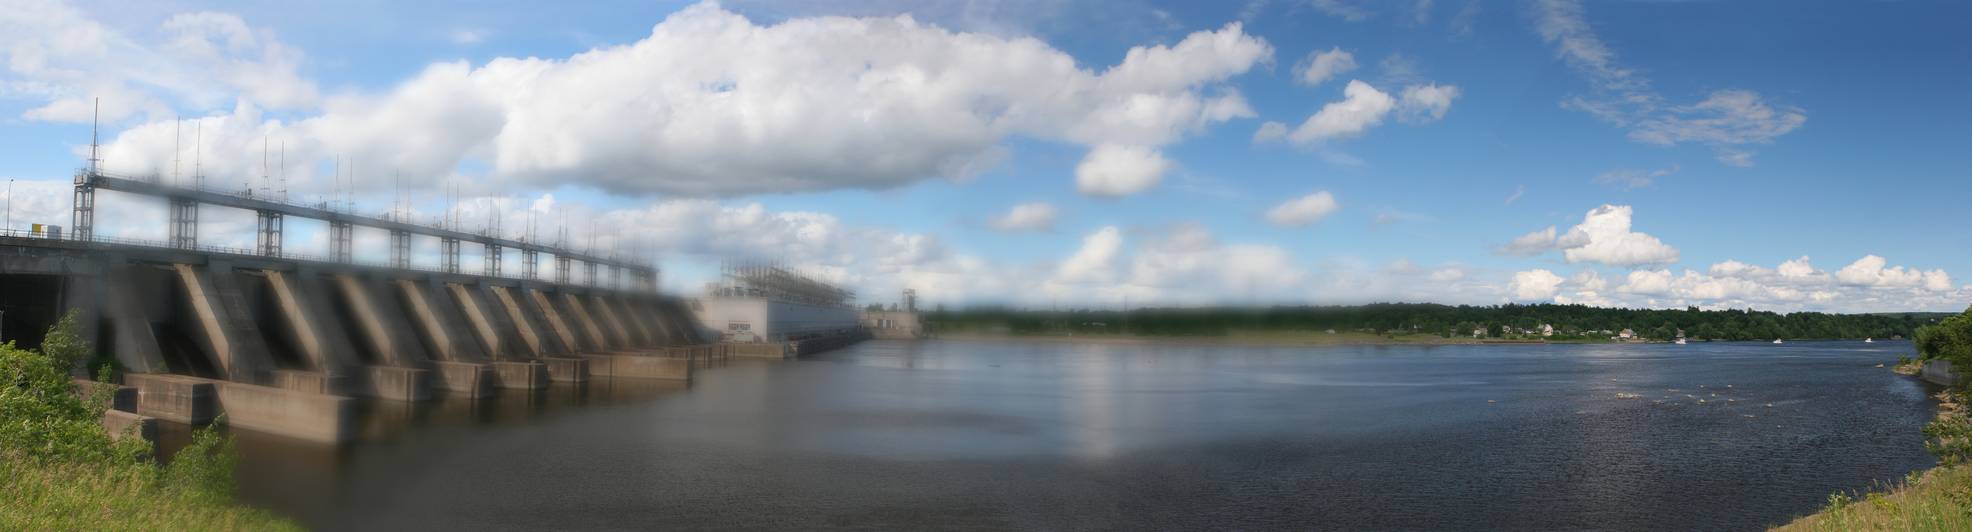 Image of ATS ARC800 Sensor Fish used as a fish simulator by fish researchers; shown with background of a hydro-power dam installation on a river